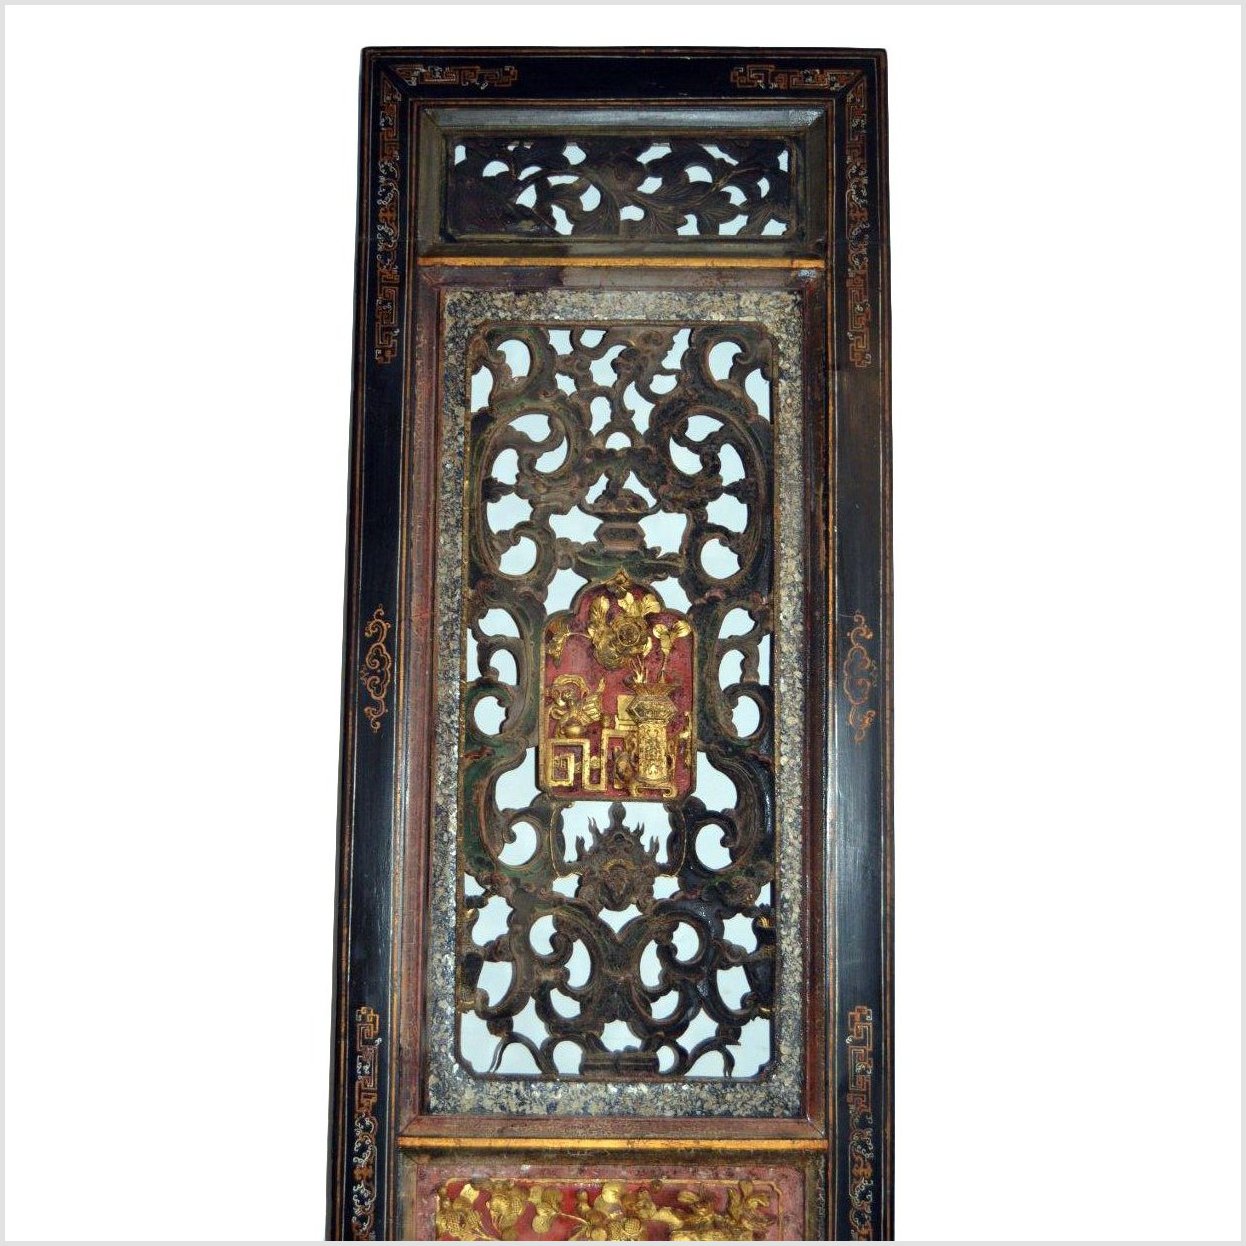 Antique Chinese Hand-Carved Wall Ornament-YN3036-2. Asian & Chinese Furniture, Art, Antiques, Vintage Home Décor for sale at FEA Home